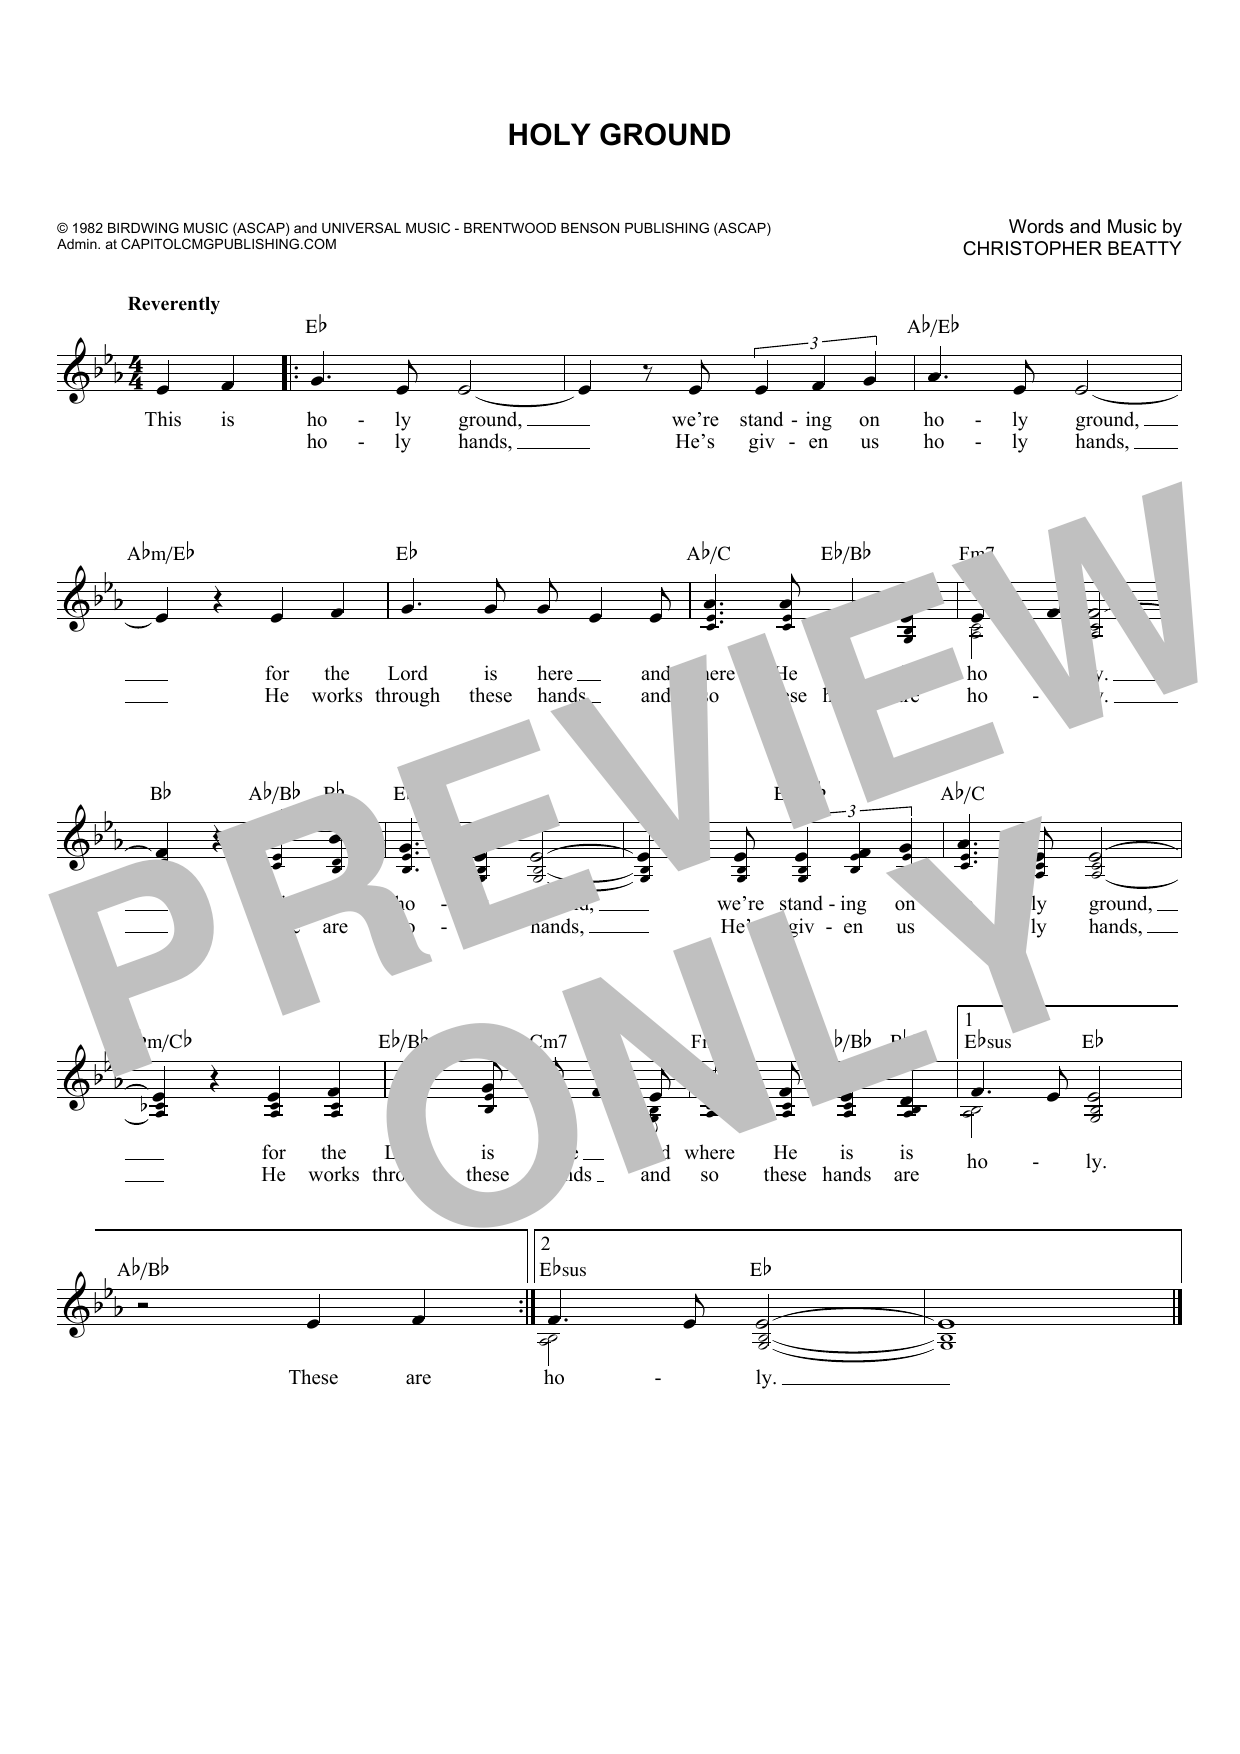 Download Christopher Beatty Holy Ground Sheet Music